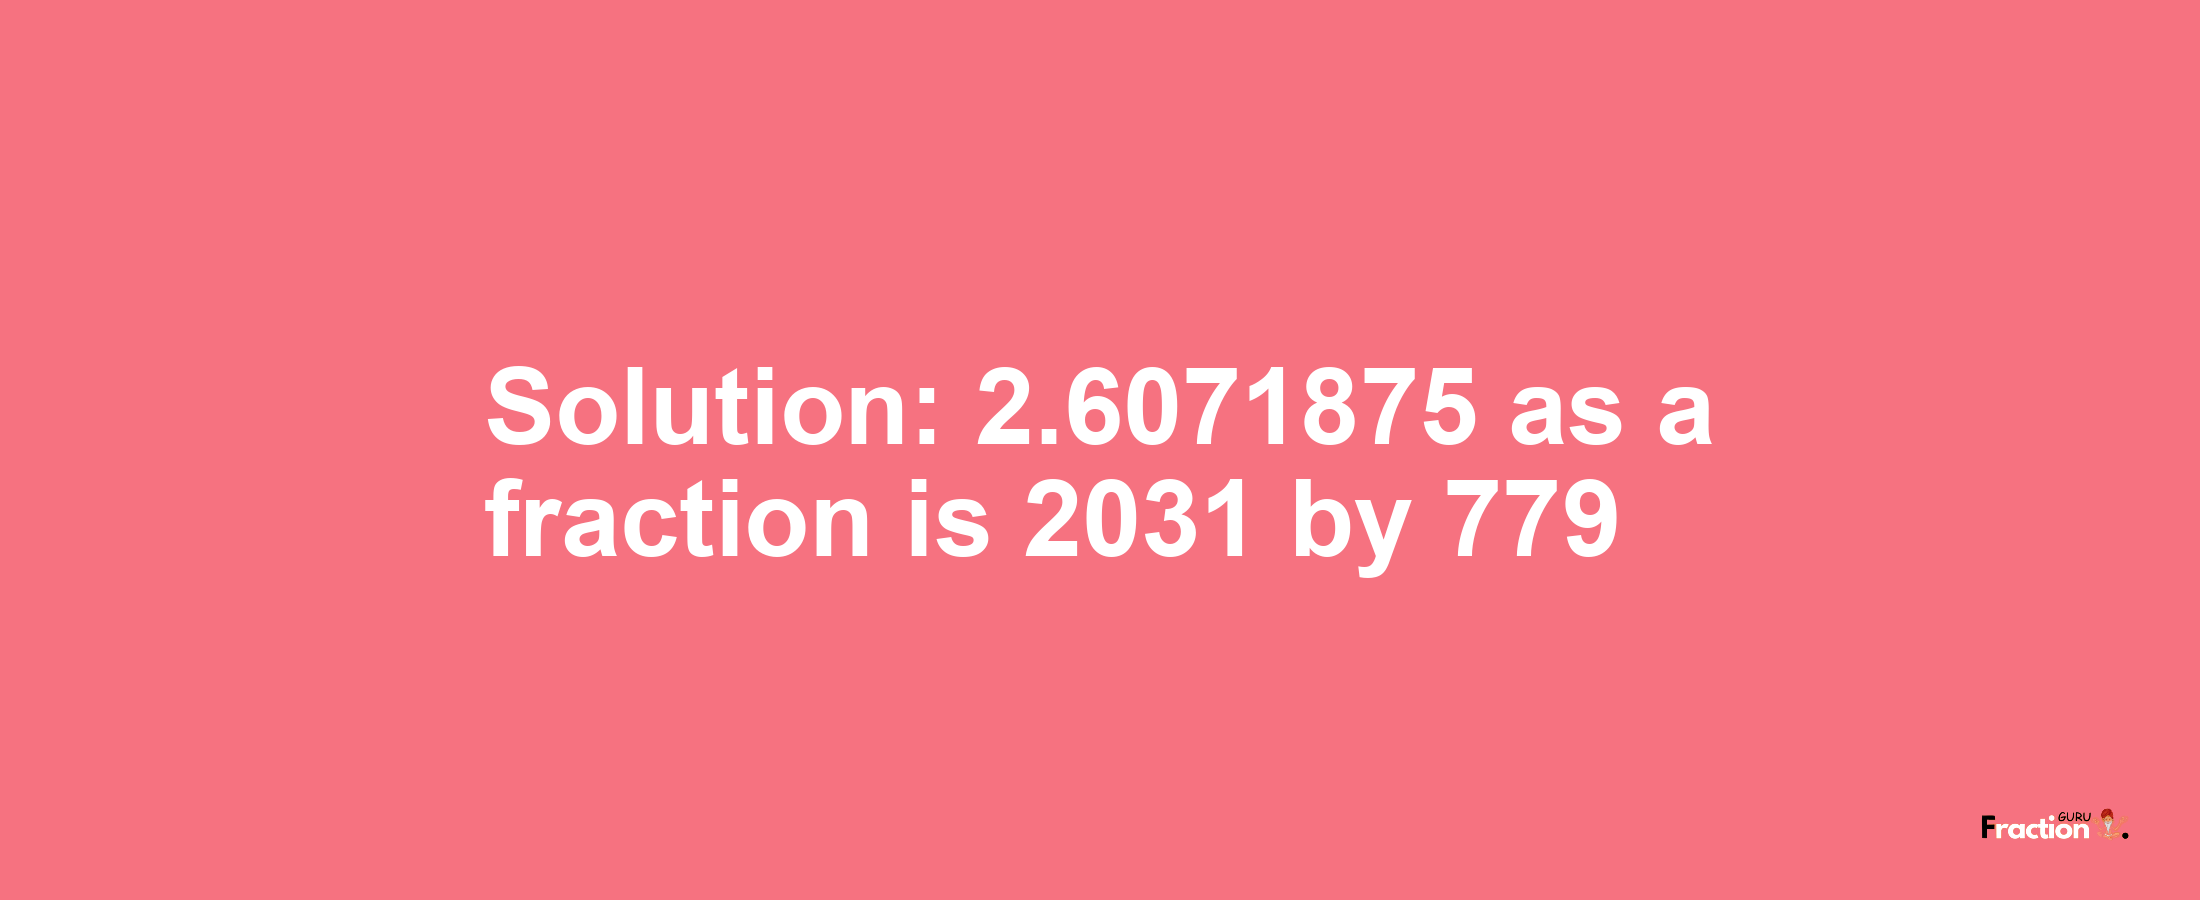 Solution:2.6071875 as a fraction is 2031/779